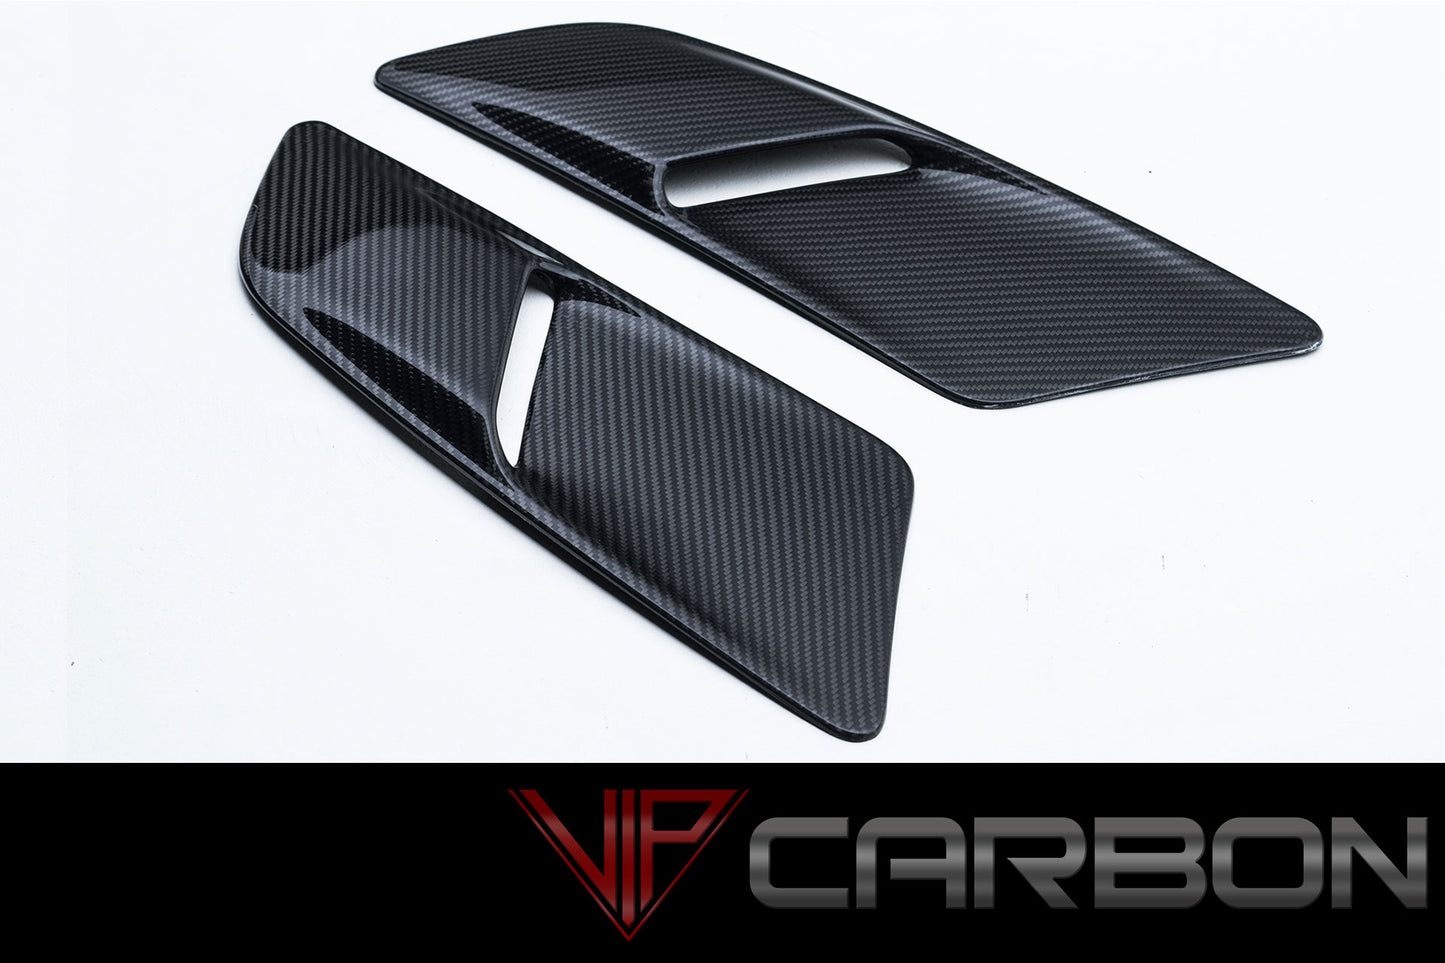 Carbon Fiber GT Hood Scoops Ford Mustang 2015-2018 by VIP